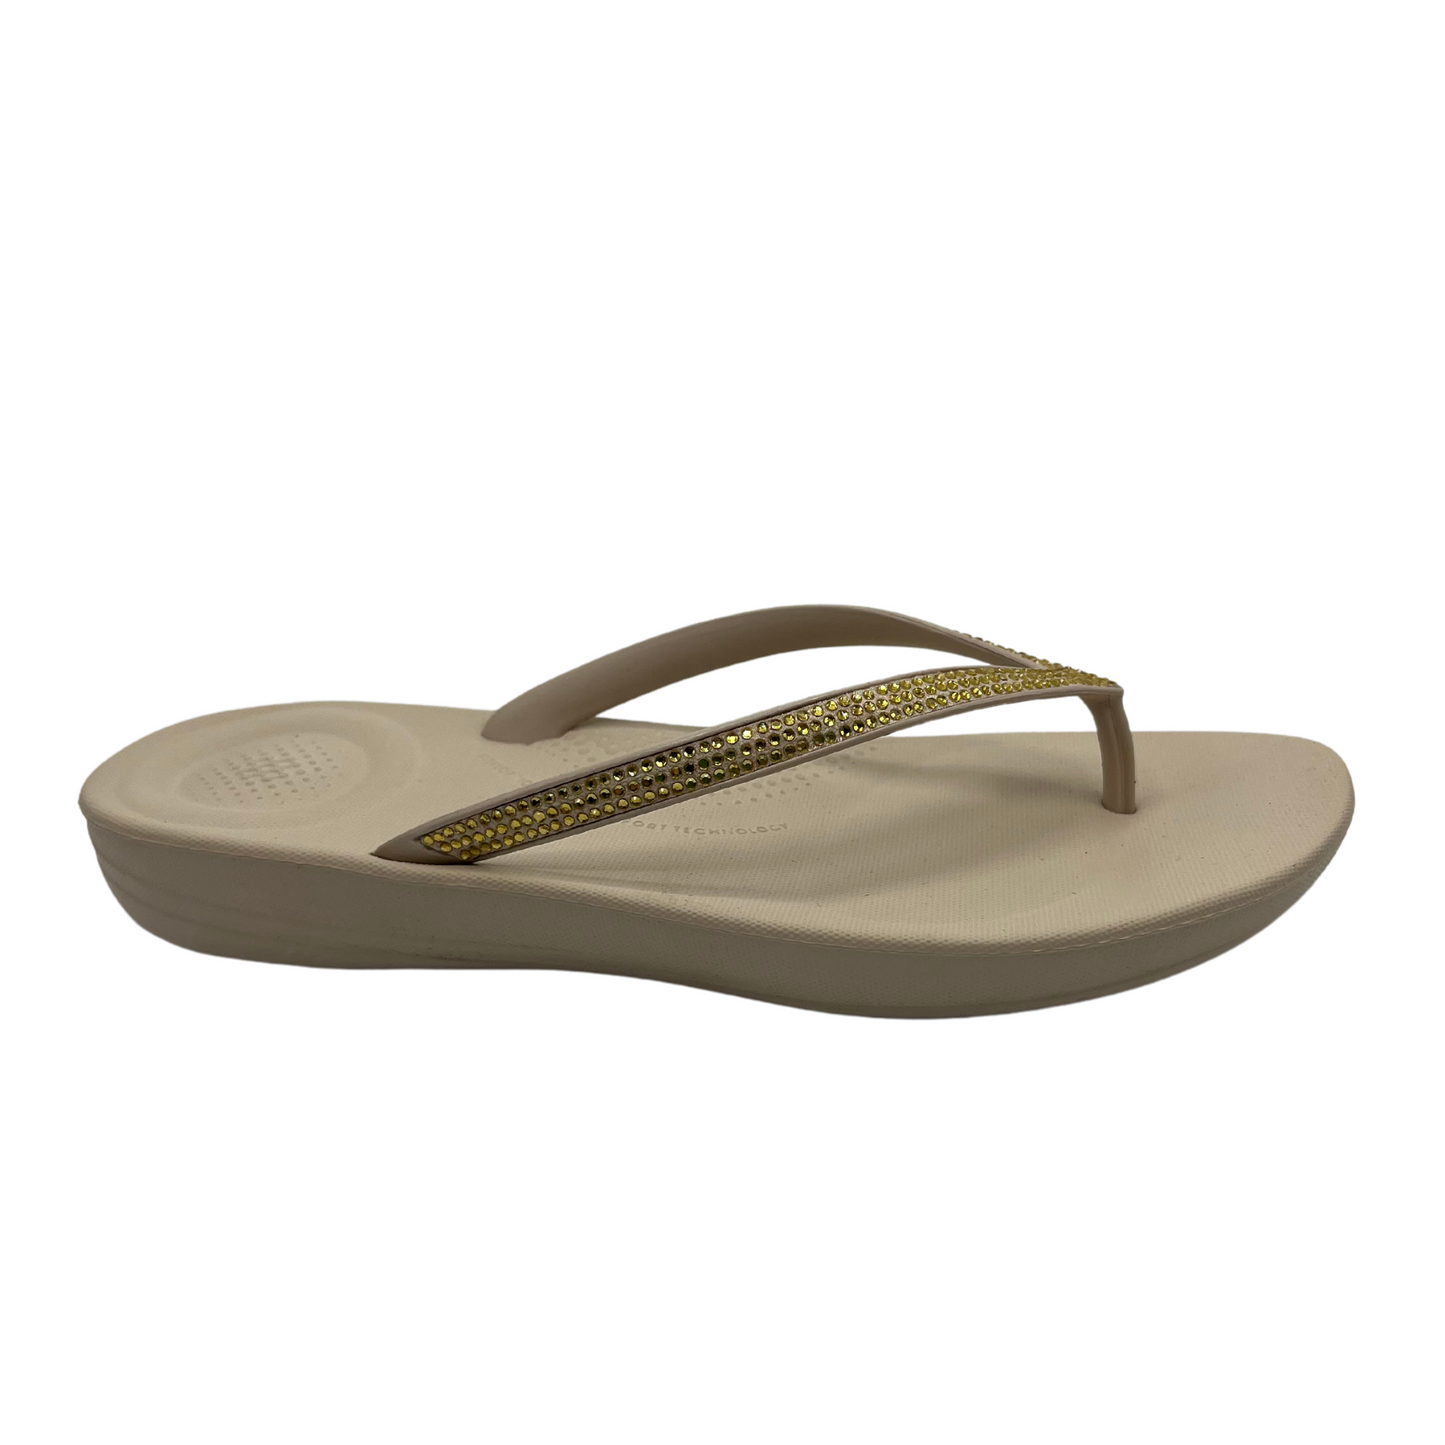 Right facing view of beige flip flop with bejewelled thong strap